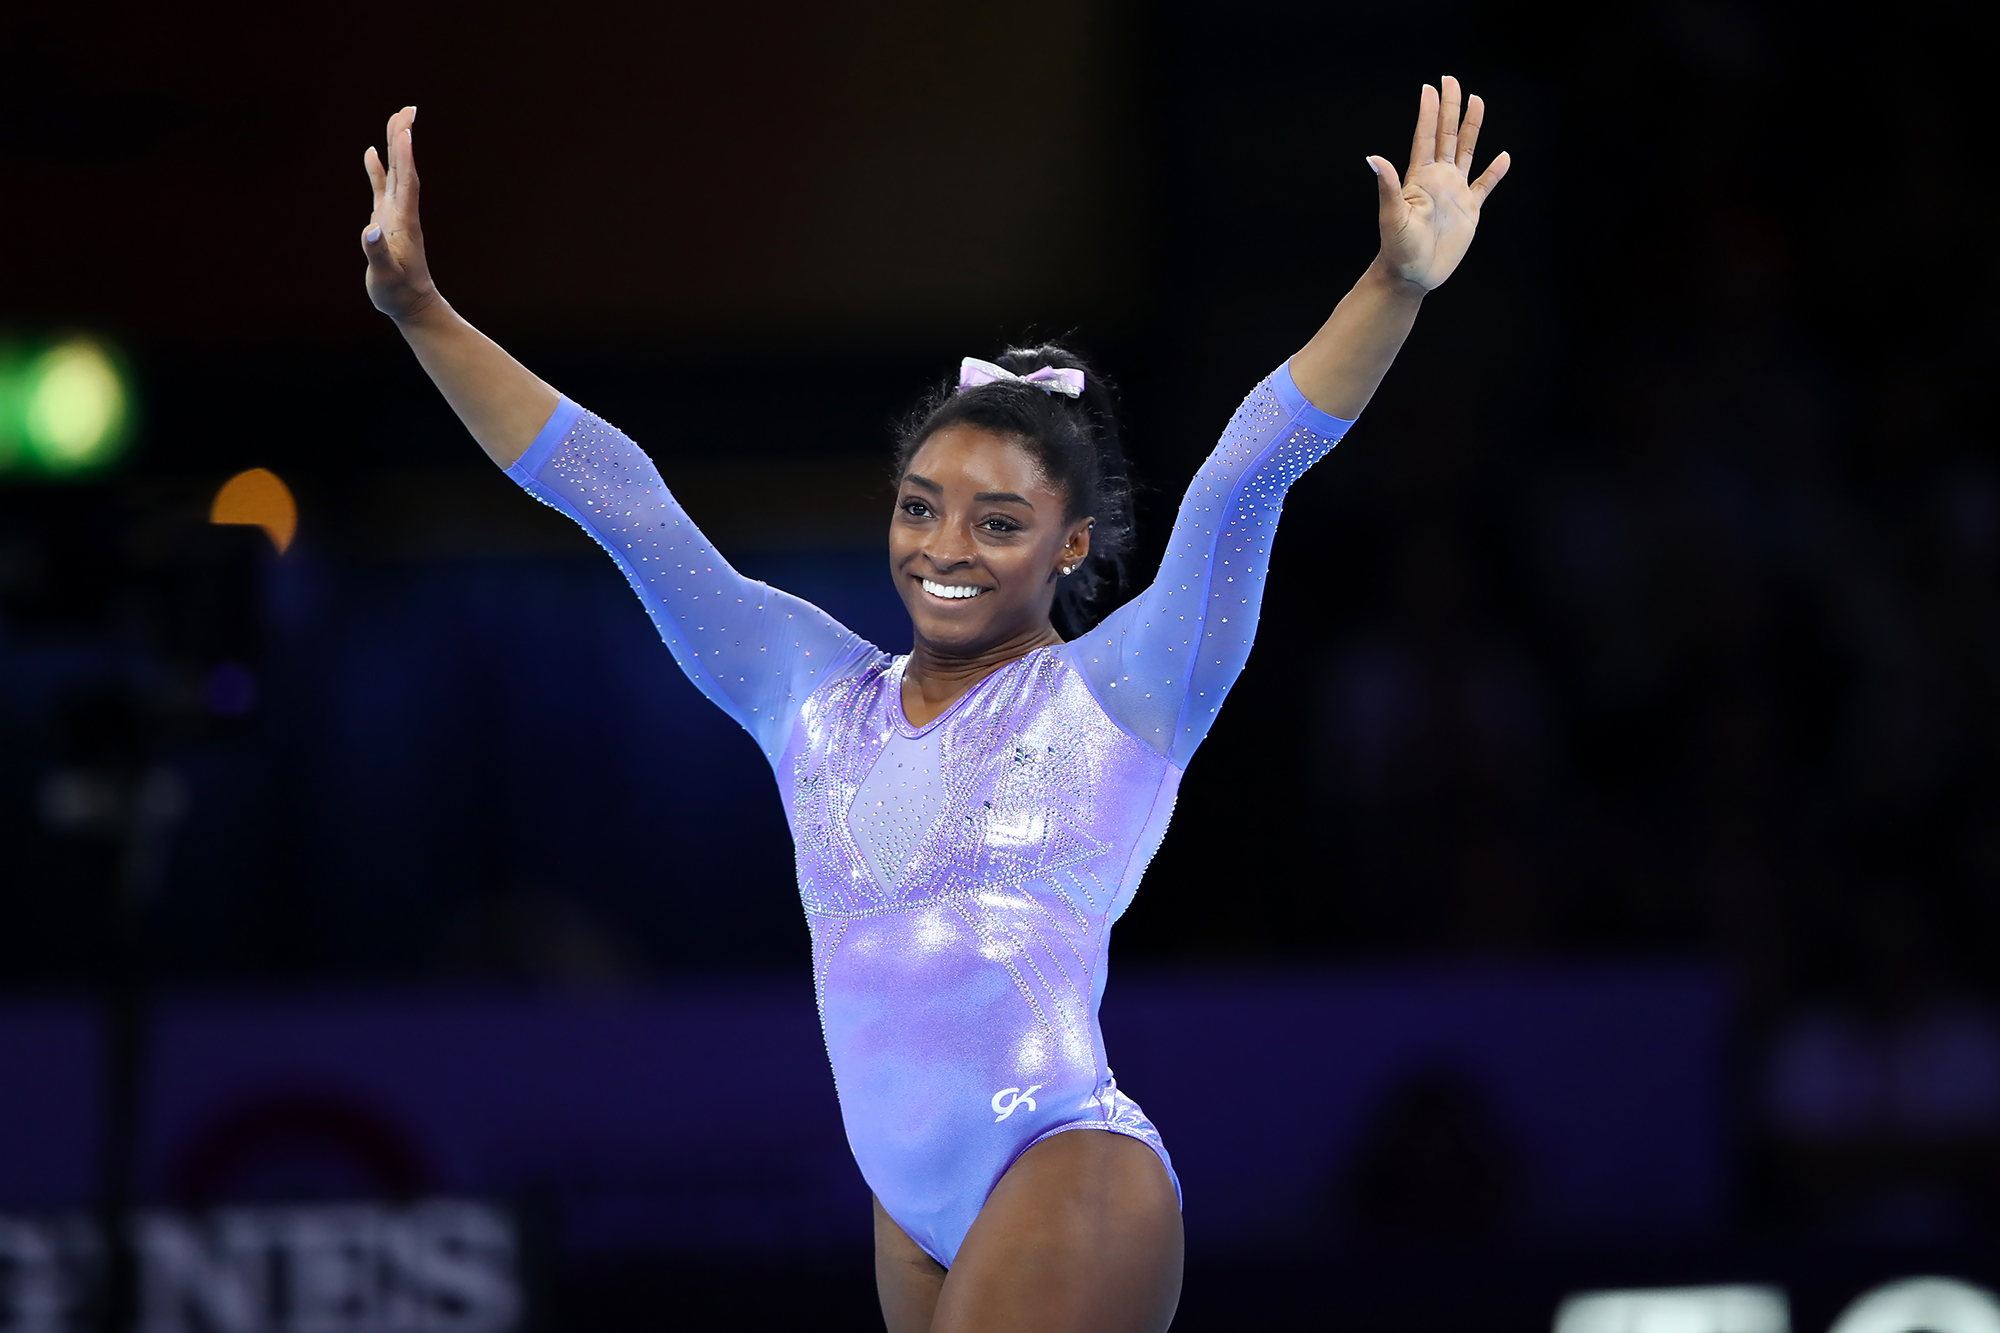 U.S. Olympic Gymnastic Team's Bedazzled Leotards Cost $1,200